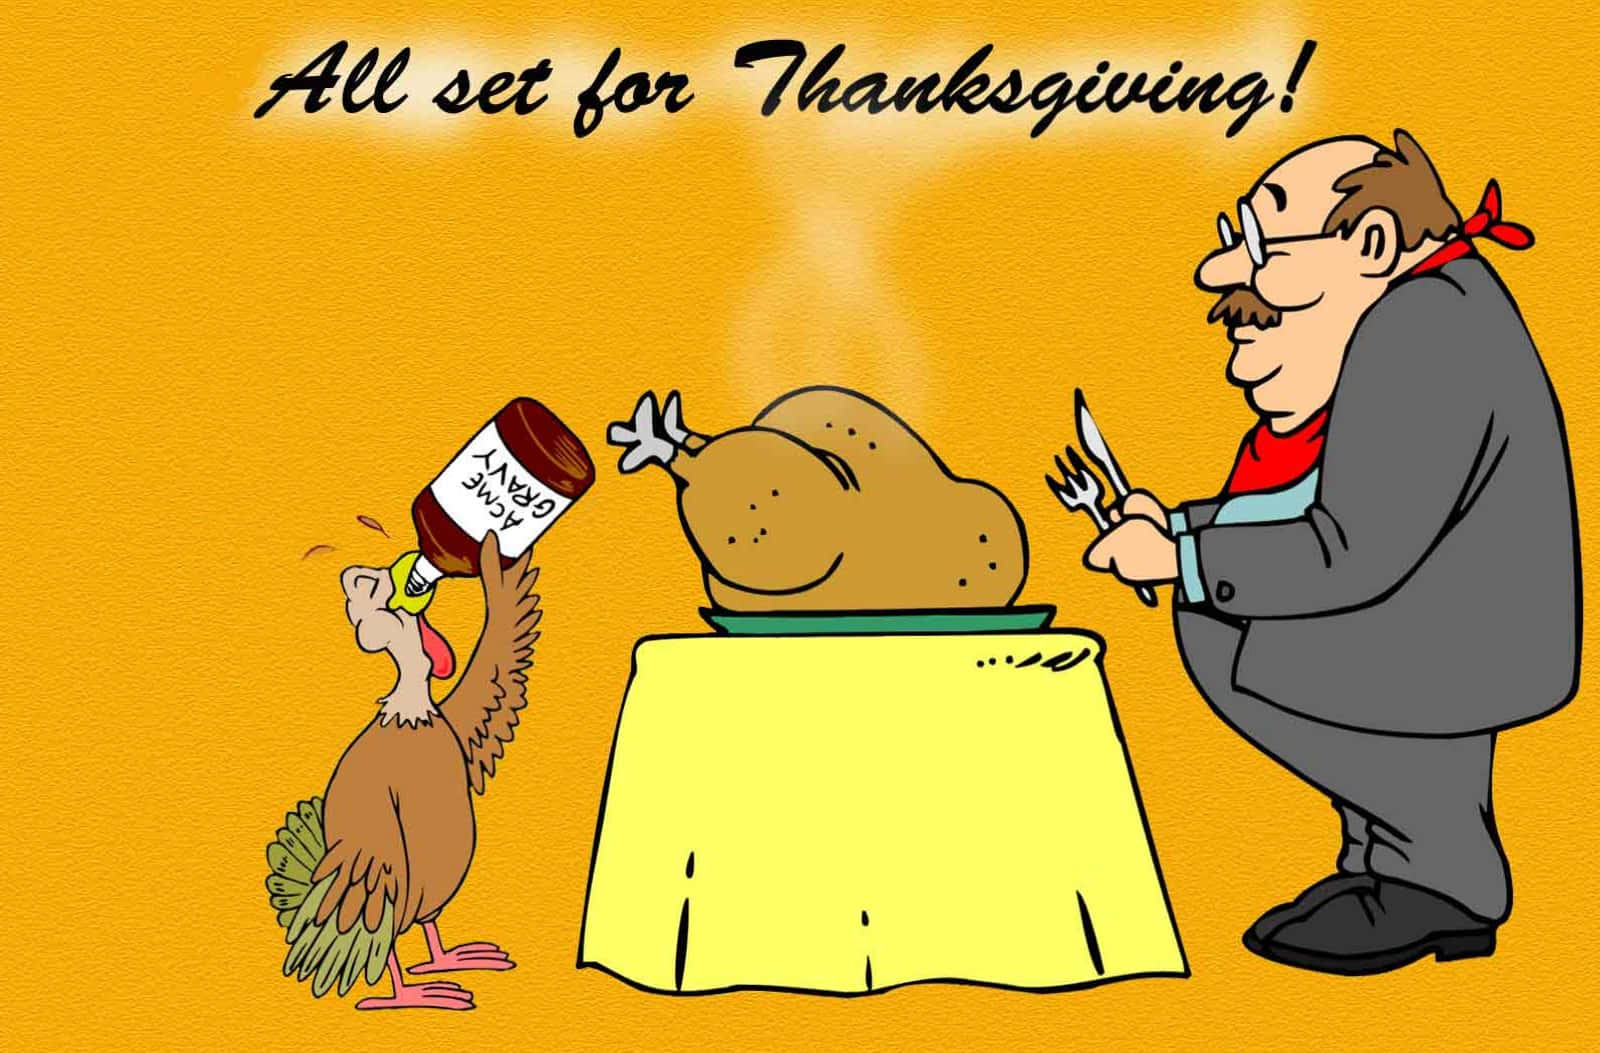 It's the season for turkey and funny memories with friends and family!